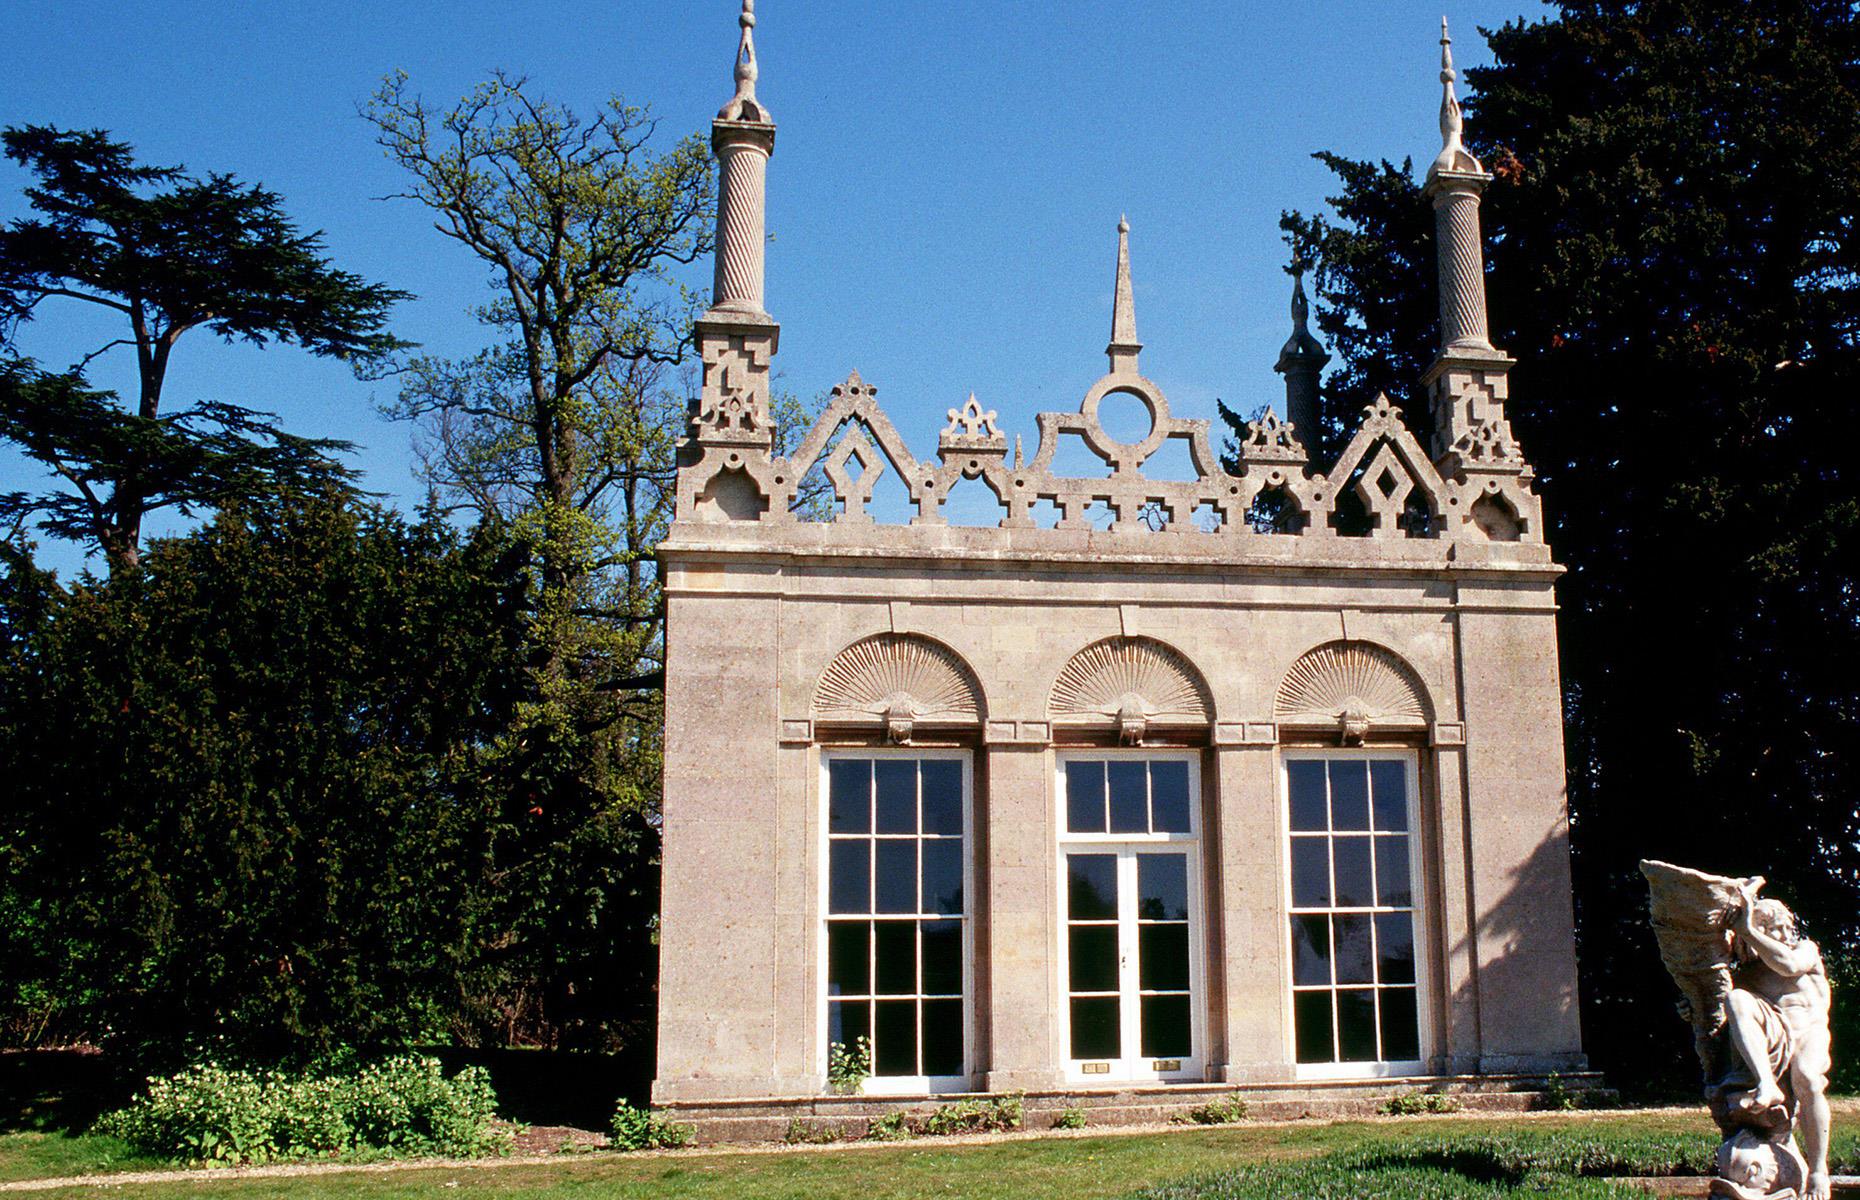 <p>This wish was granted as Lady Leatham has lived at Burghley since 1982, looking after the house on behalf of the family-run <a href="https://burghley.co.uk/about-us/the-estate/charitable-trusts">Burghley Preservation Trust</a>, an organisation dedicated to conserving the estate as a historical resource for future generations.</p>  <p>In 2007 she passed her responsibilities on to her daughter, Mrs Miranda Rock and the house has been continuously maintained and used for several interesting projects...</p>